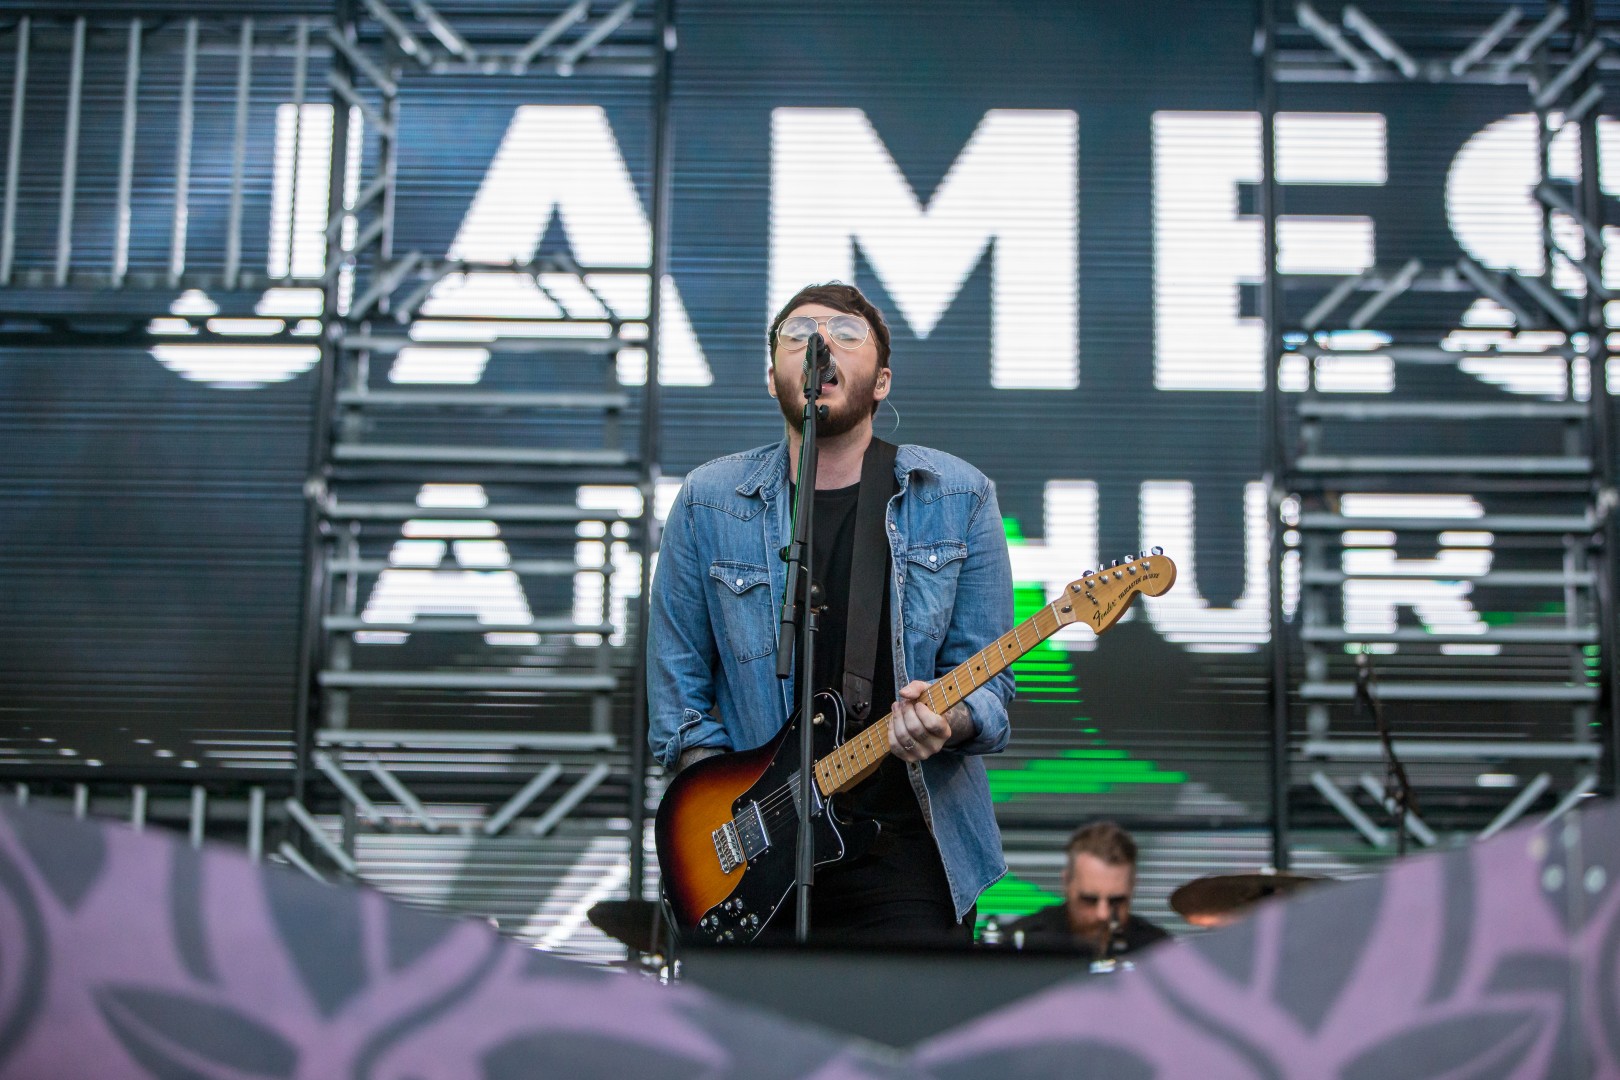 James Arthur at Cluj Arena in Cluj-Napoca on August 4, 2016 (f1c766a0cc)